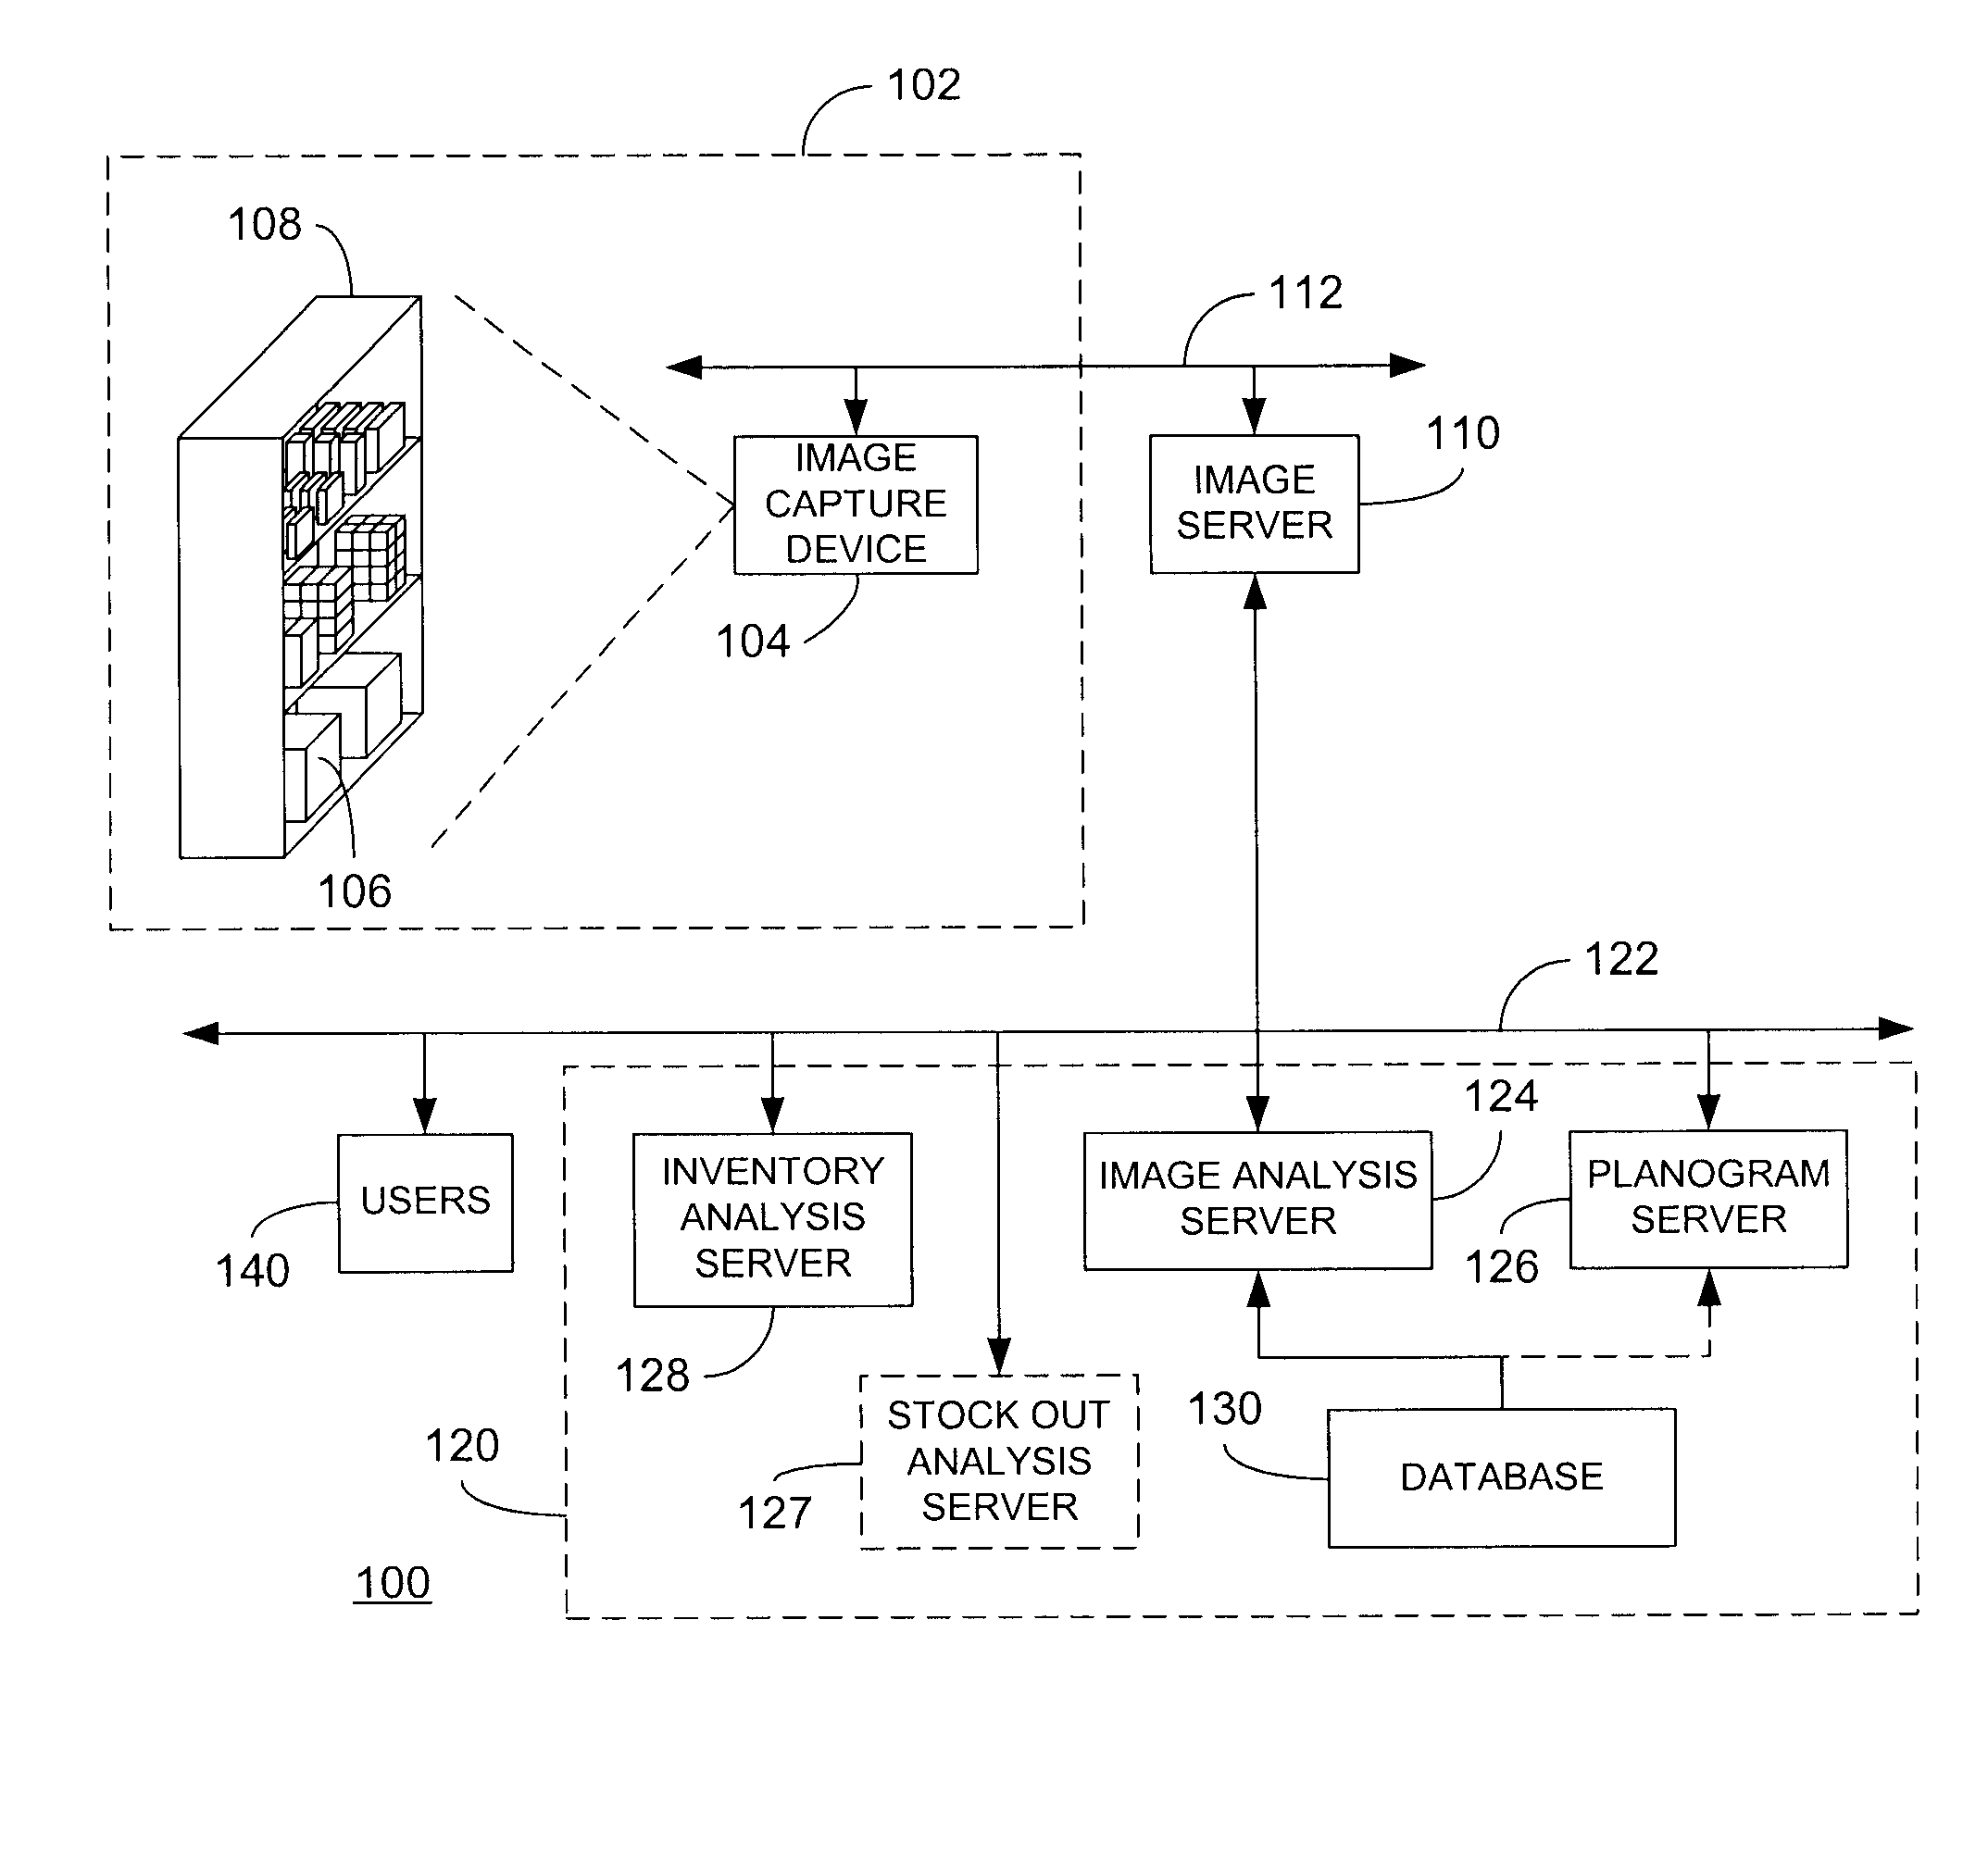 Determination of product display parameters based on image processing